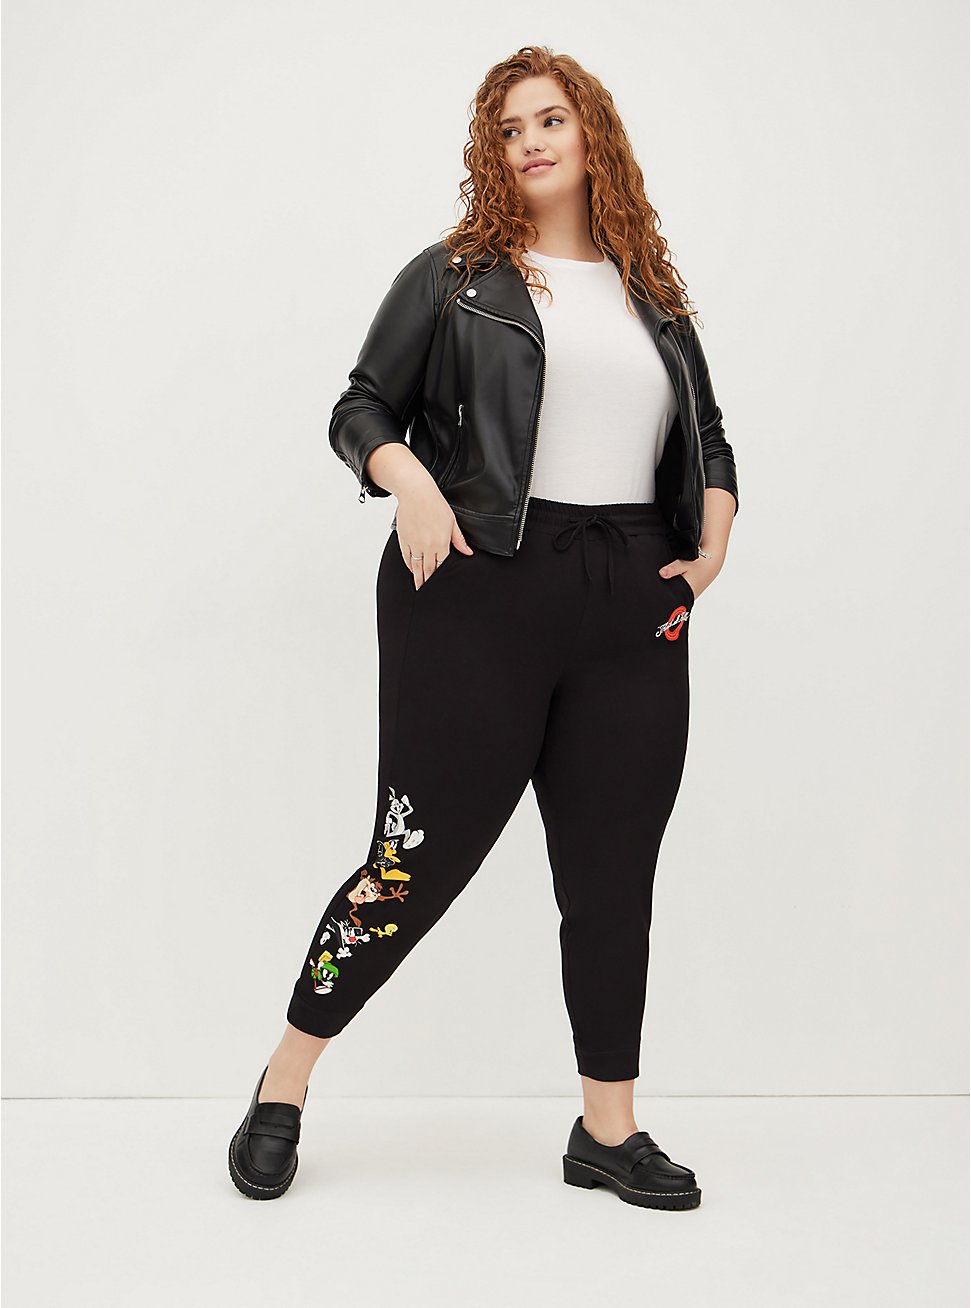 Plus Size Relaxed Fit Squad Jogger - Warner Bros. Looney Tunes , DEEP BLACK, hi-res